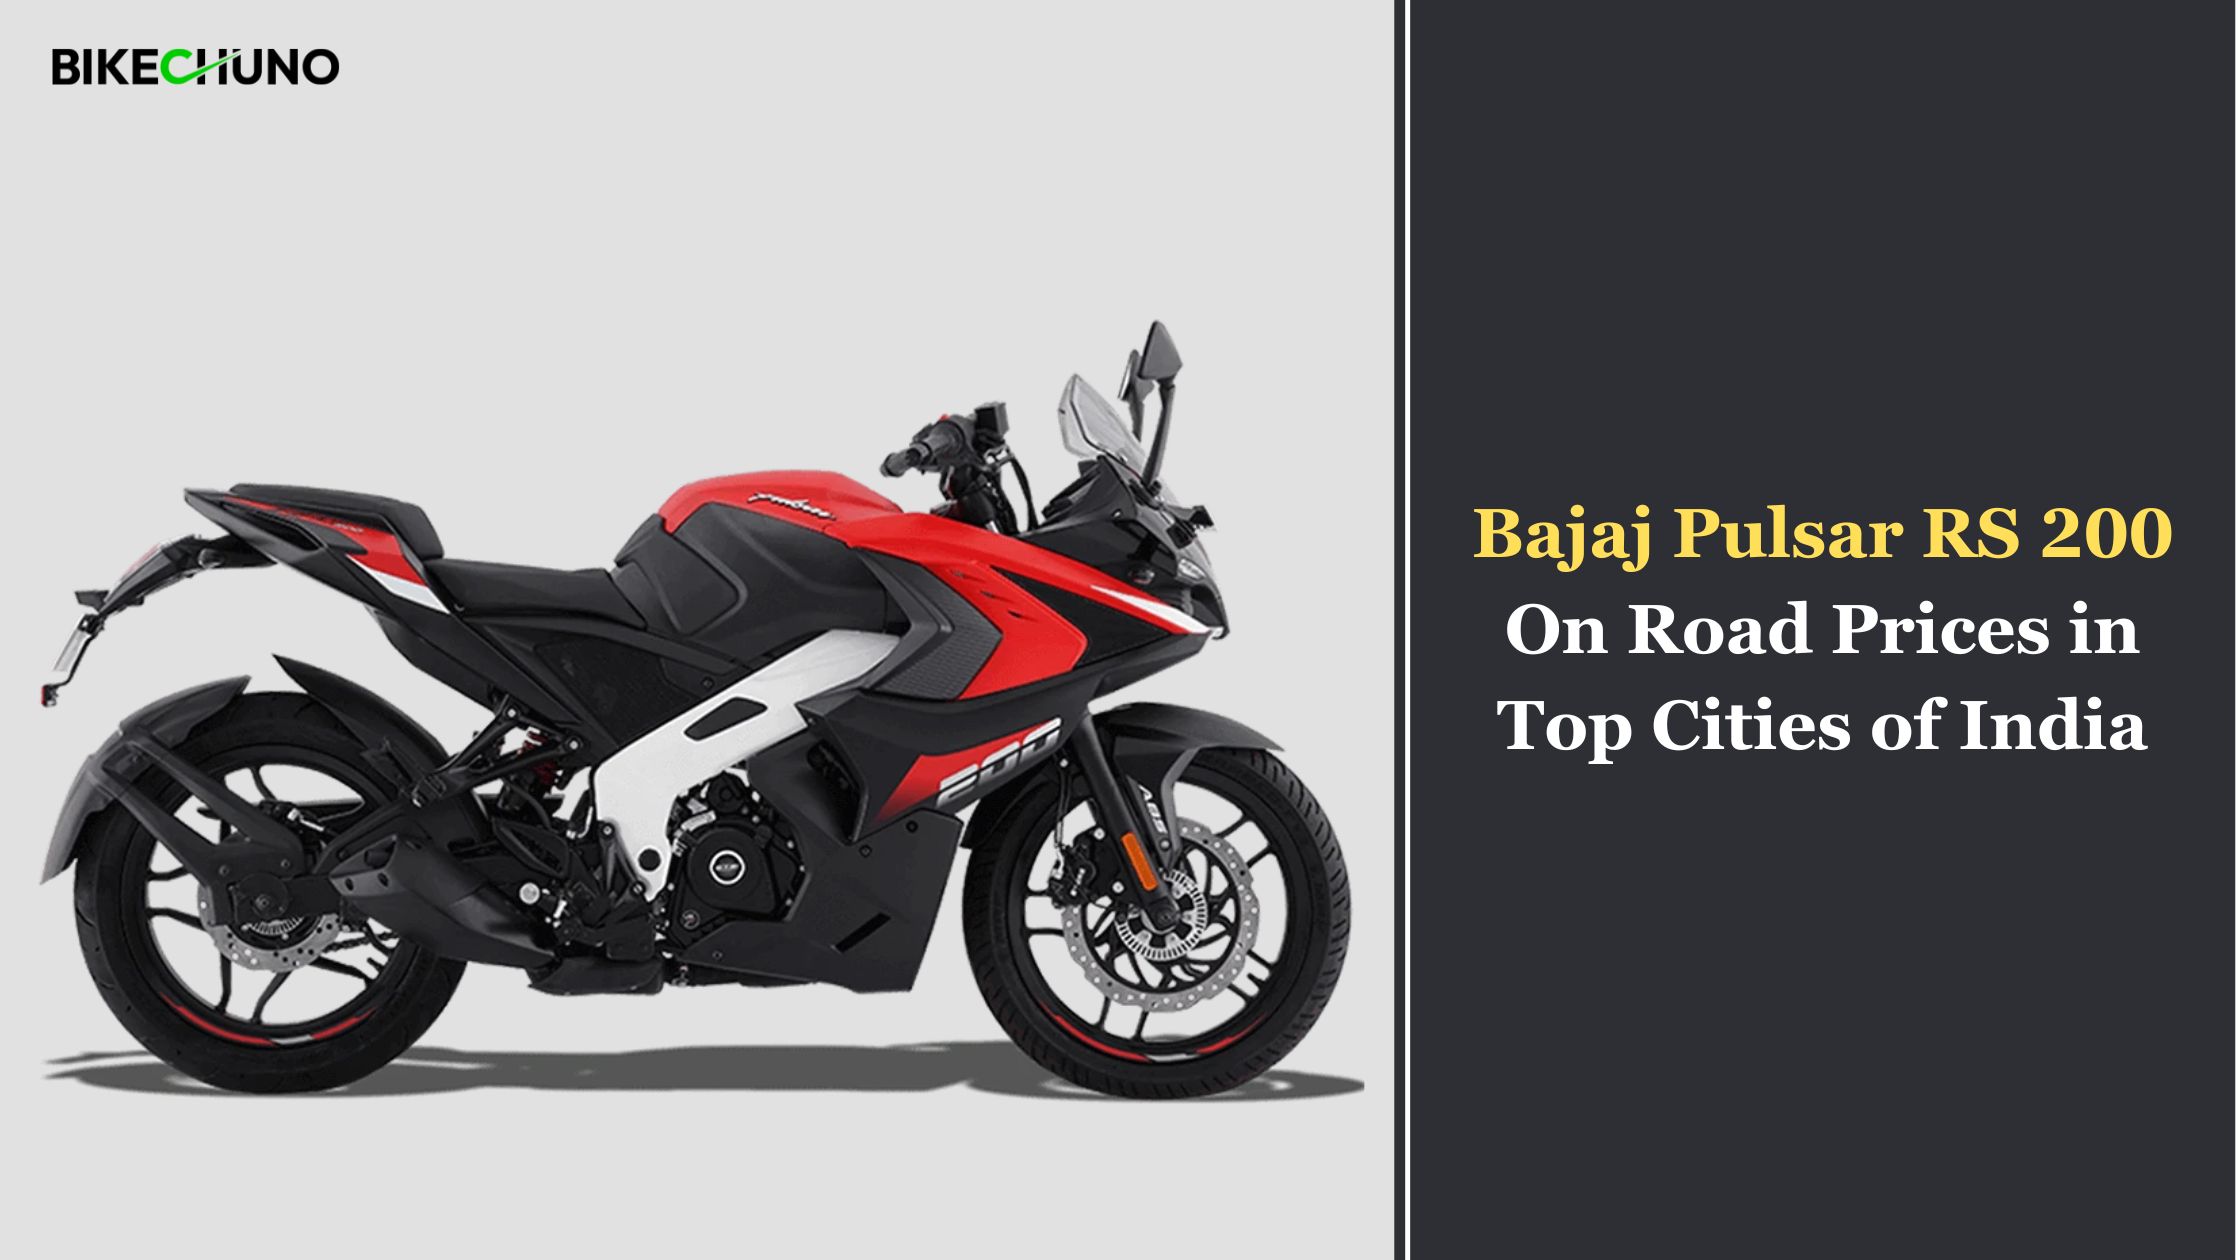 Bajaj Pulsar RS 200 on-road prices in top cities of India